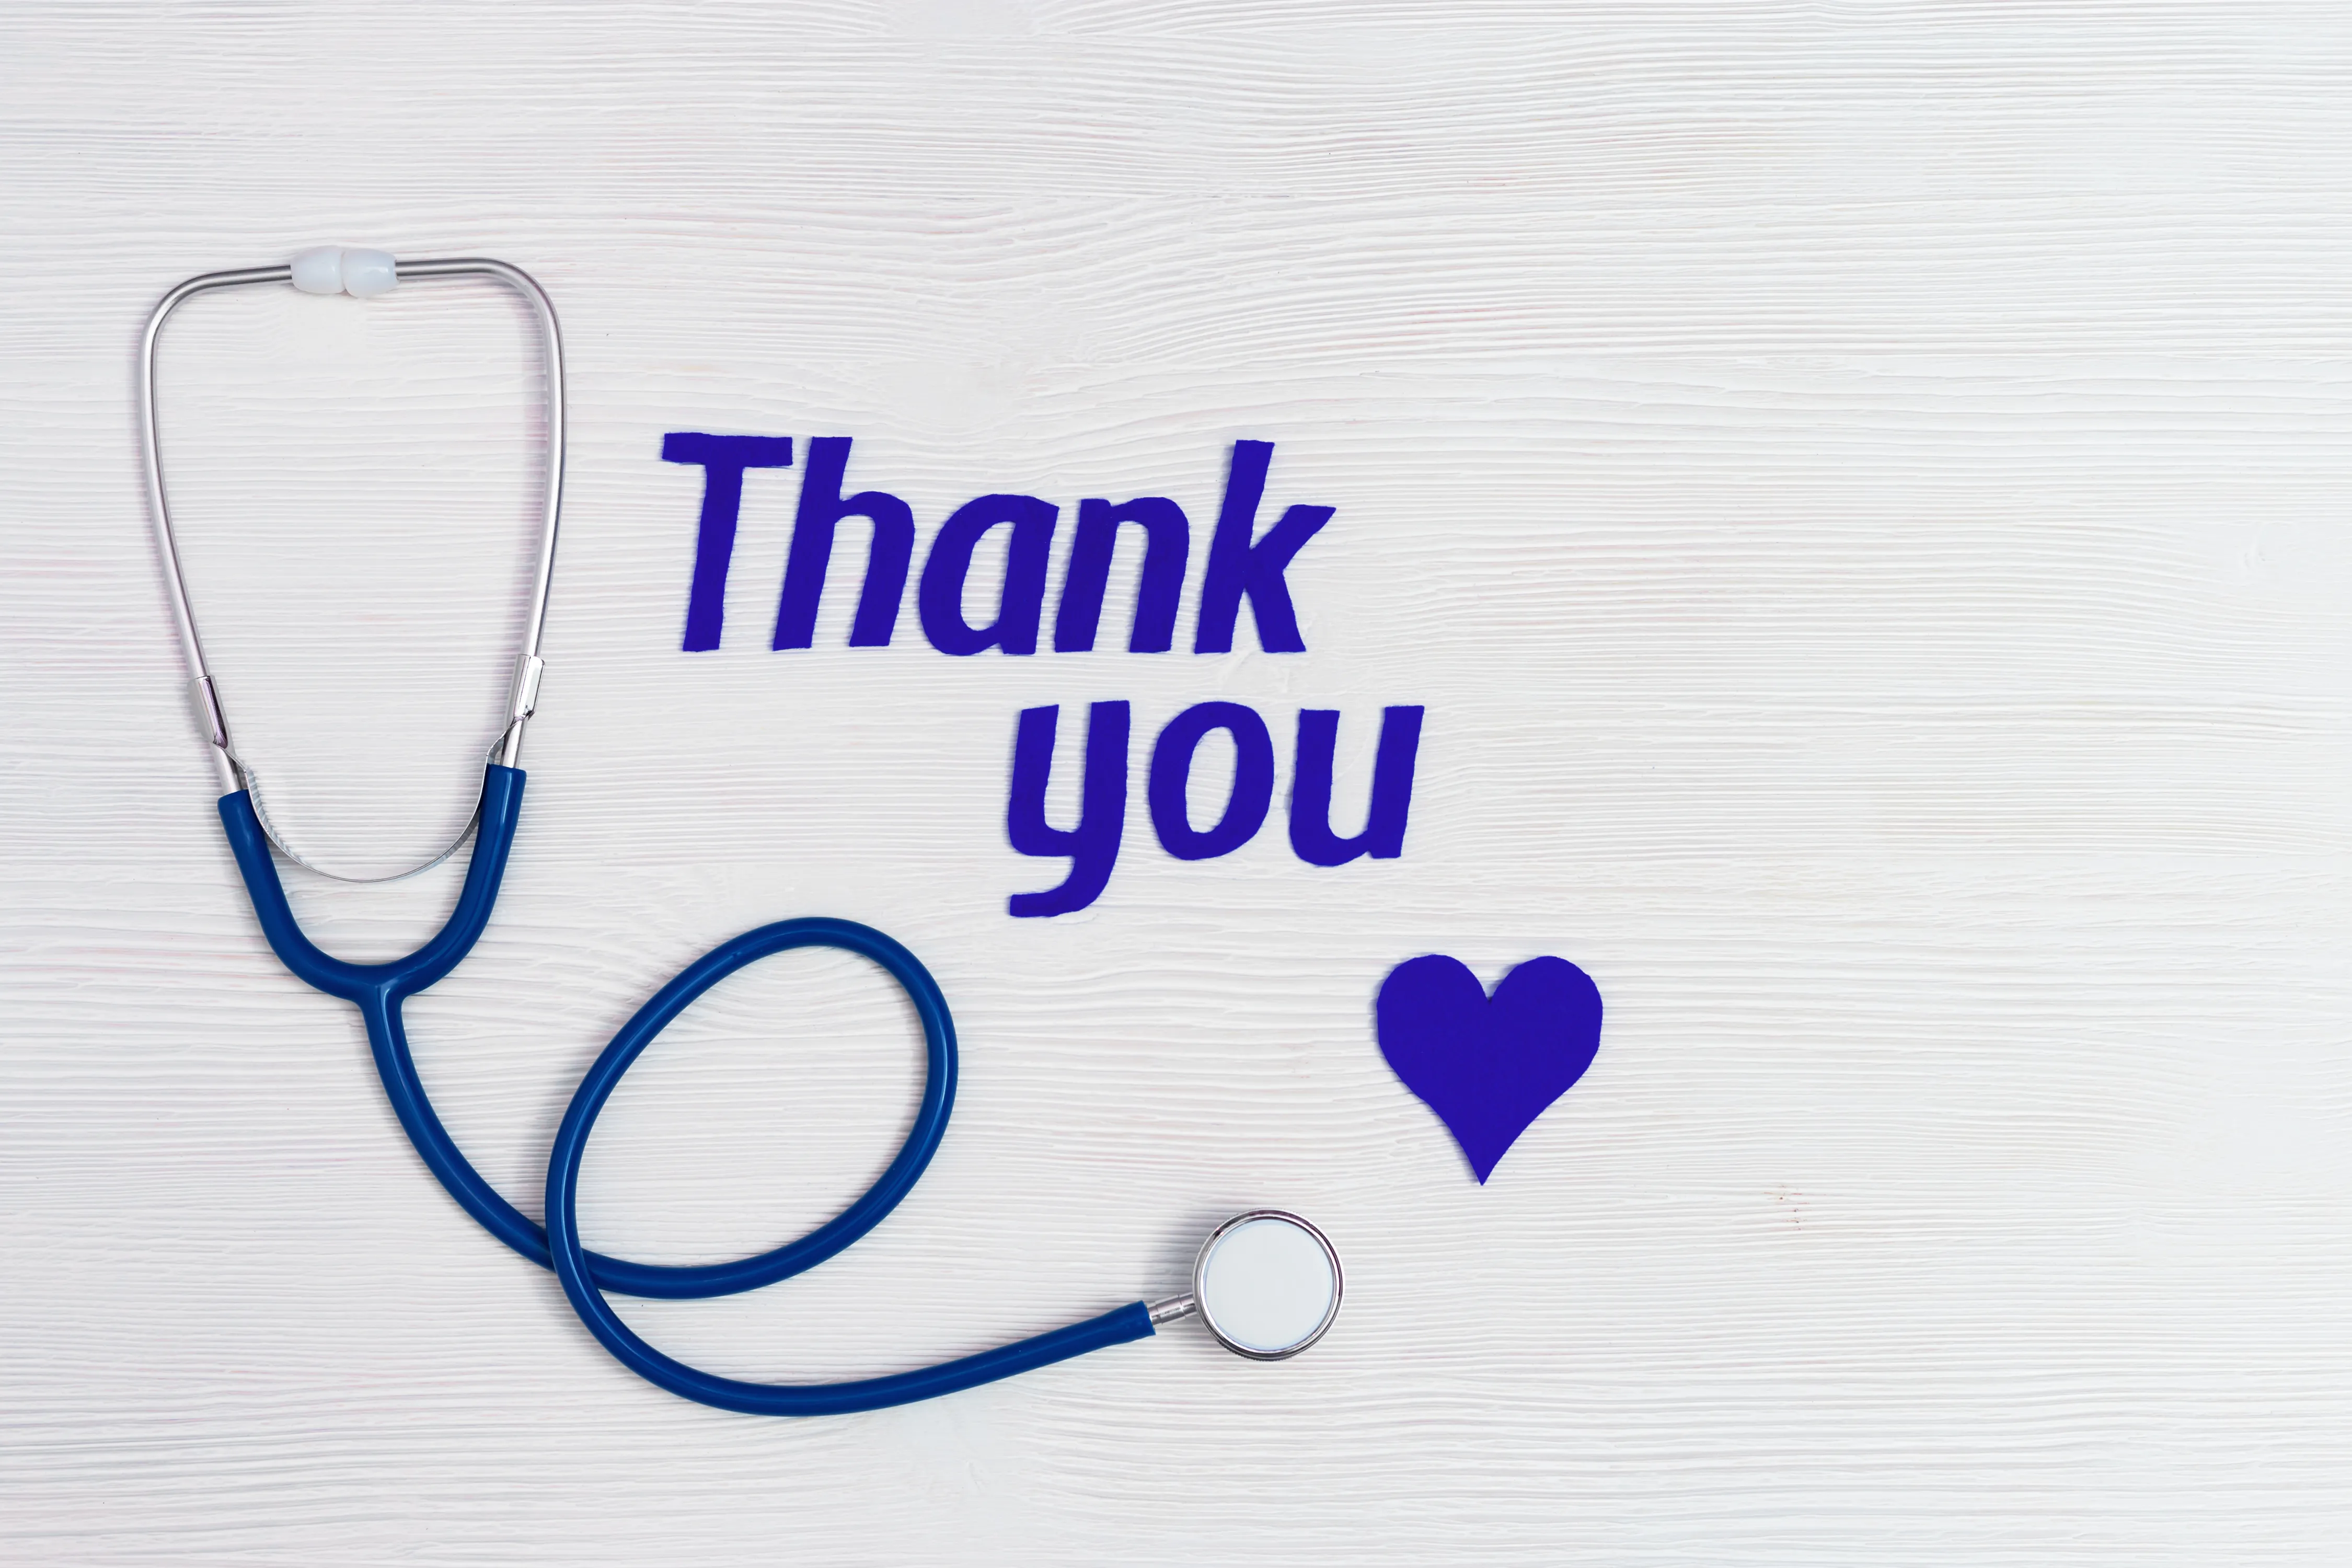 8614809-medical-stethoscope-blue-heart-text-thank-you-white-wooden-background-with-copy-space-healthcare-medicine-concept-national-nurses-day